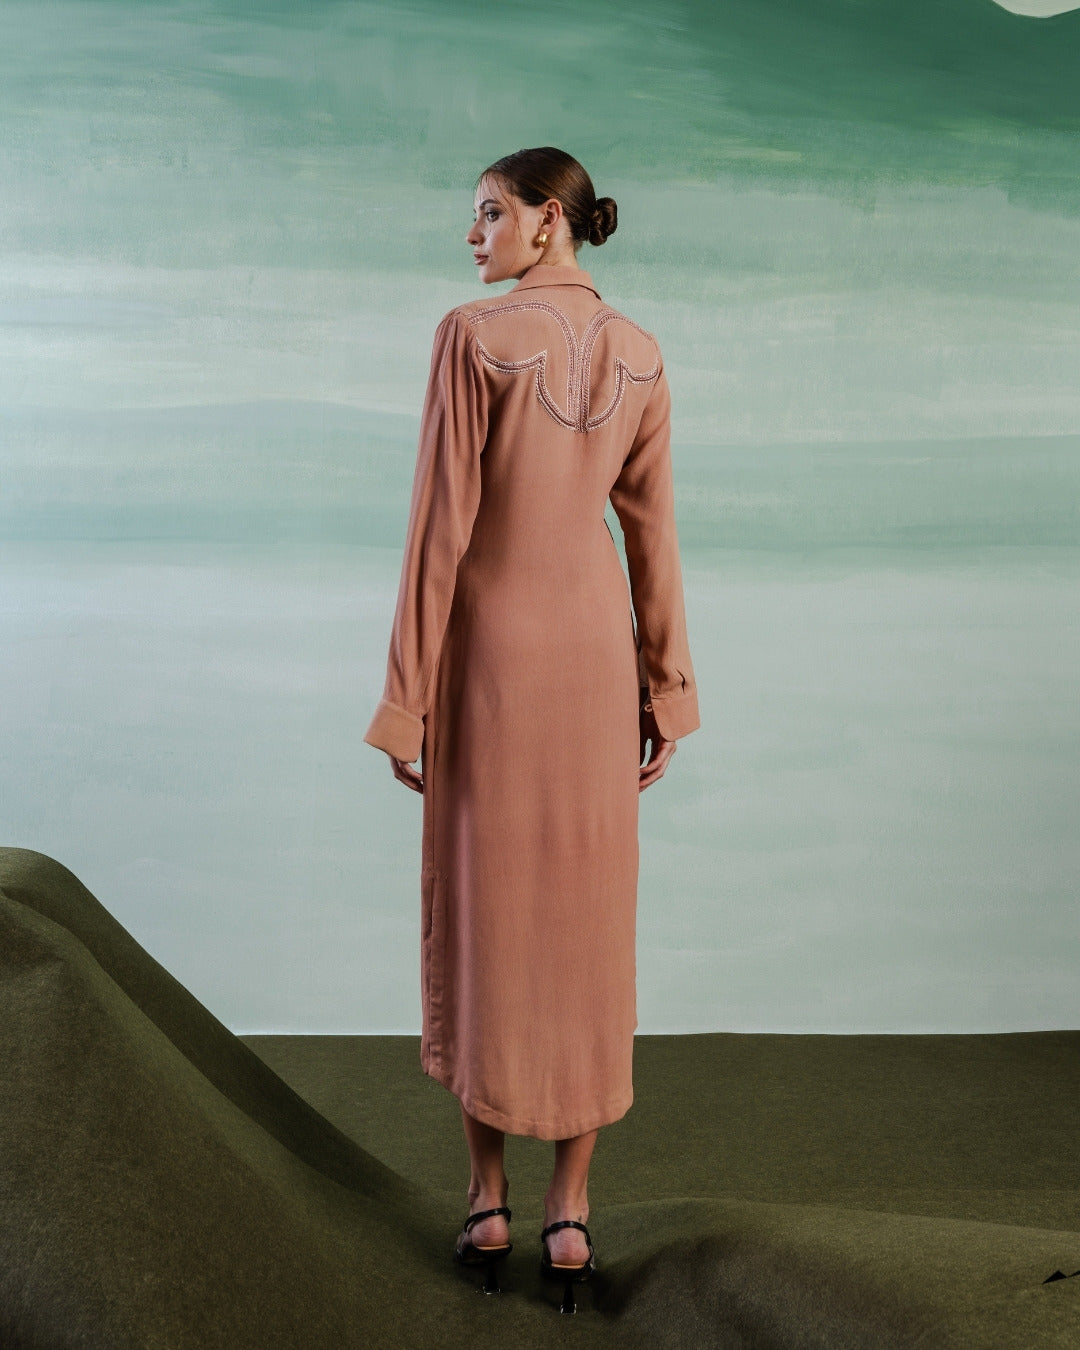 The Imperial A-Line Dress with Side Slits